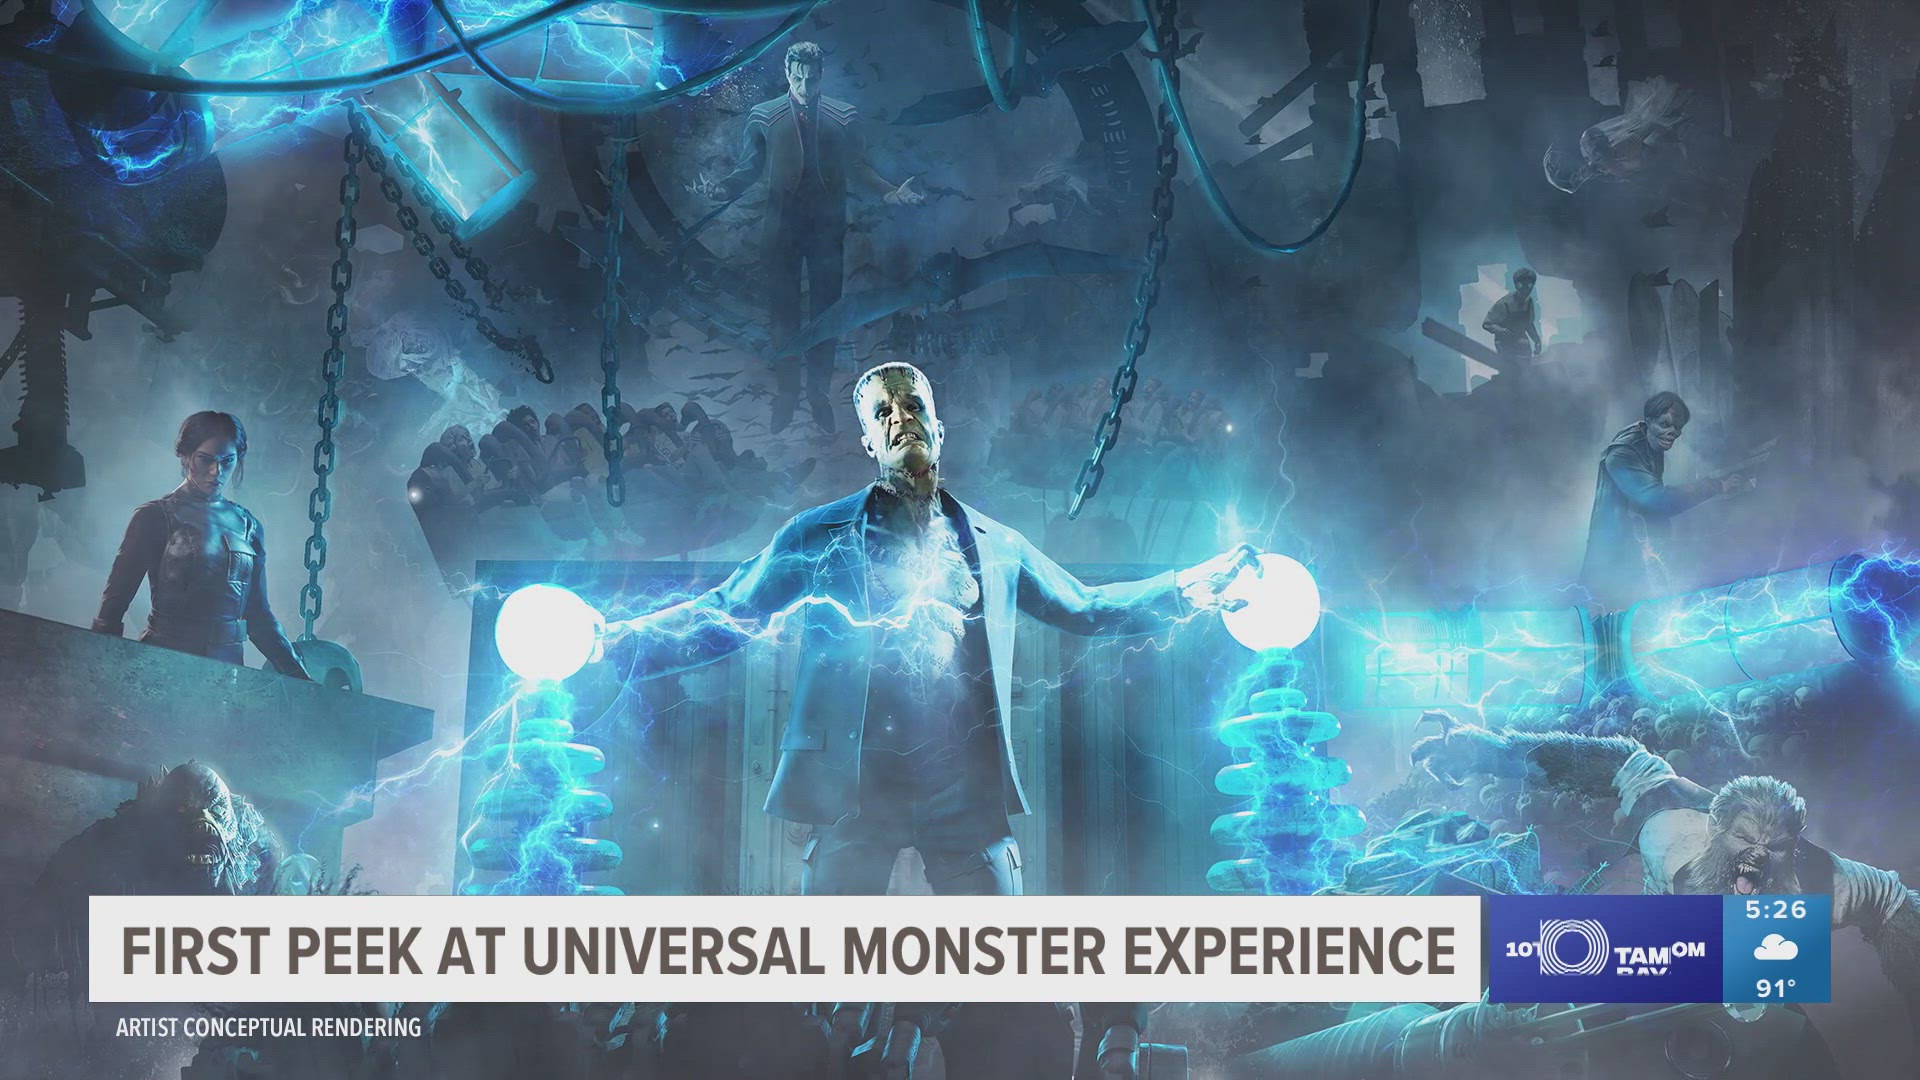 The new park will open in 2025, showcasing the monsters that originally brought Universal to life. In addition to rides, the park will have restaurants and eateries.